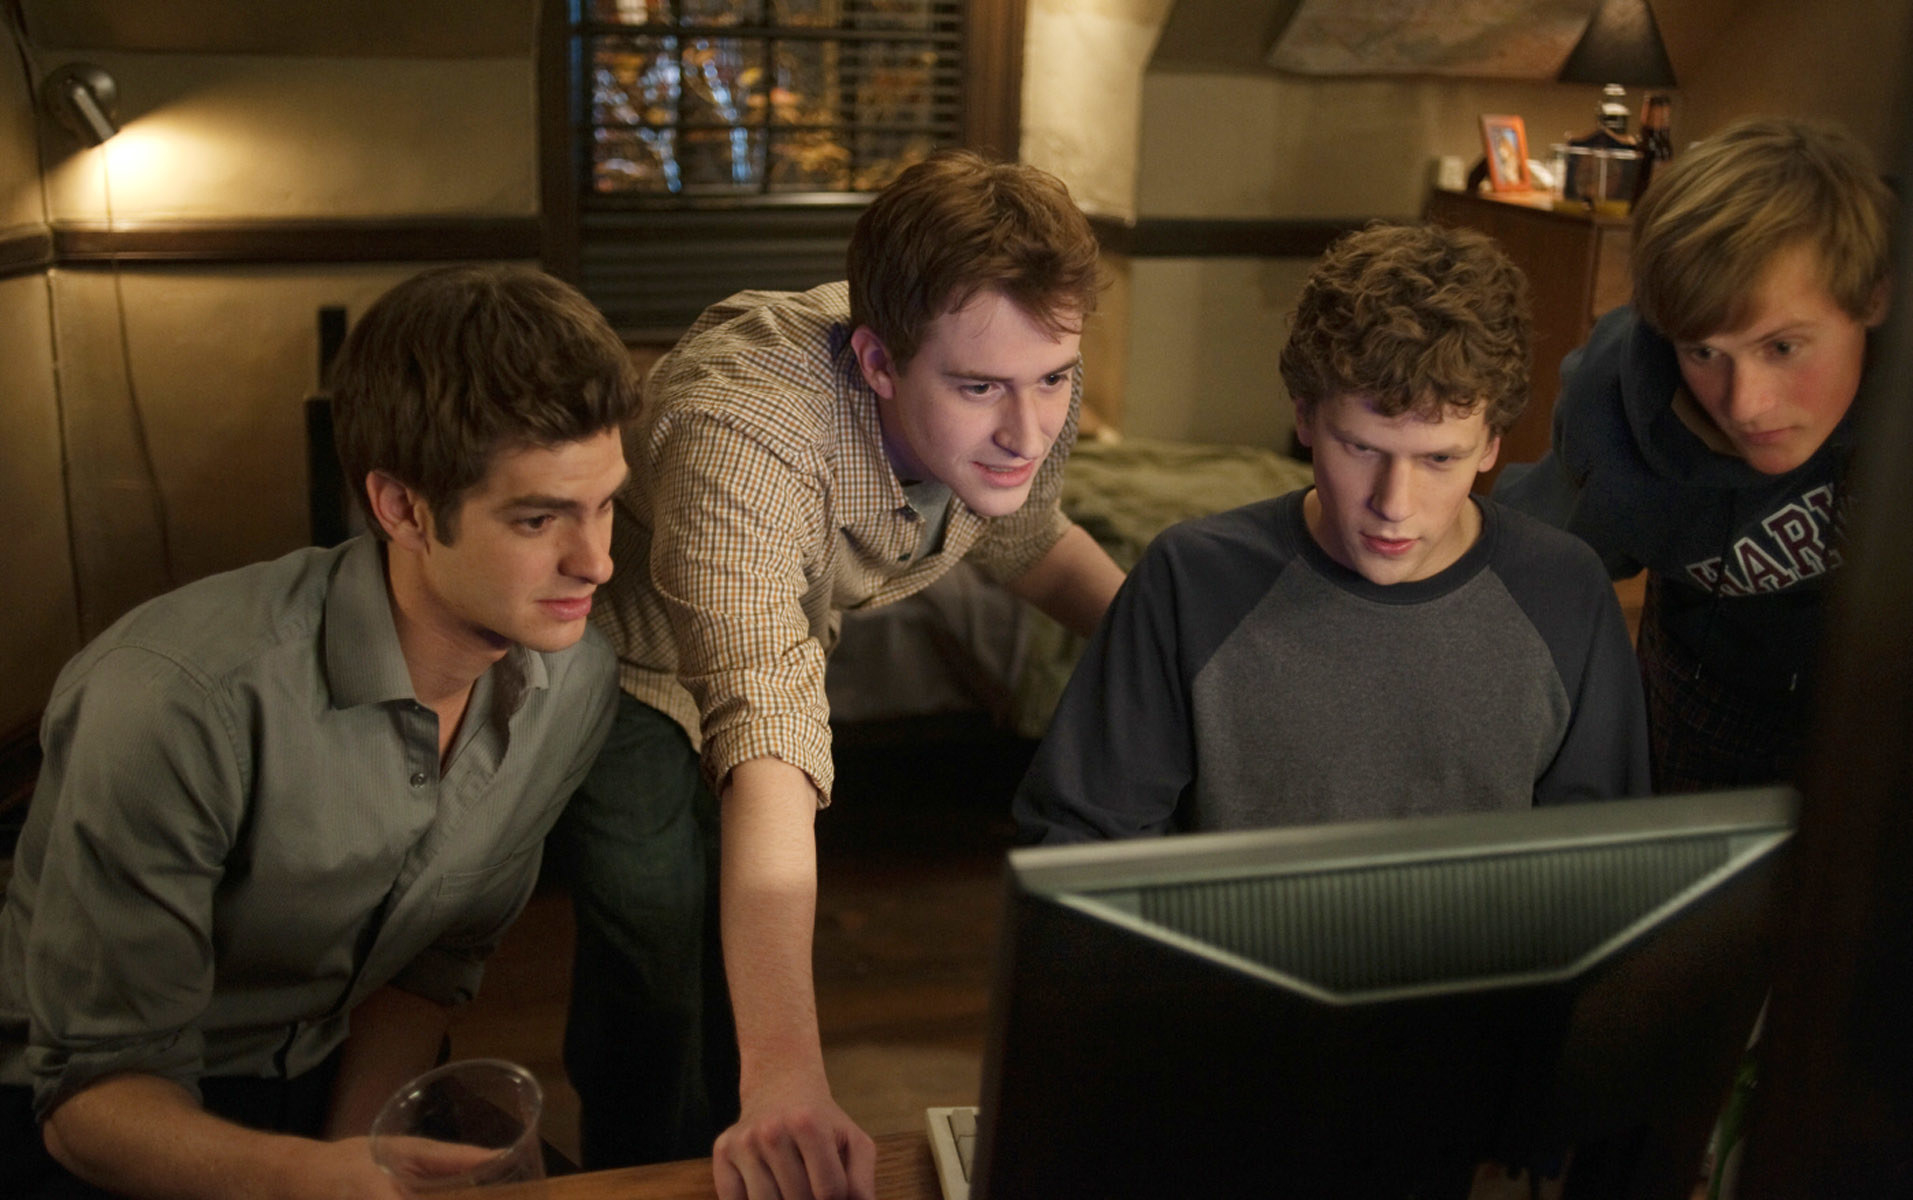 Andrew Garfield, Joseph Mazzello and Jesse Eisenberg look at a computer